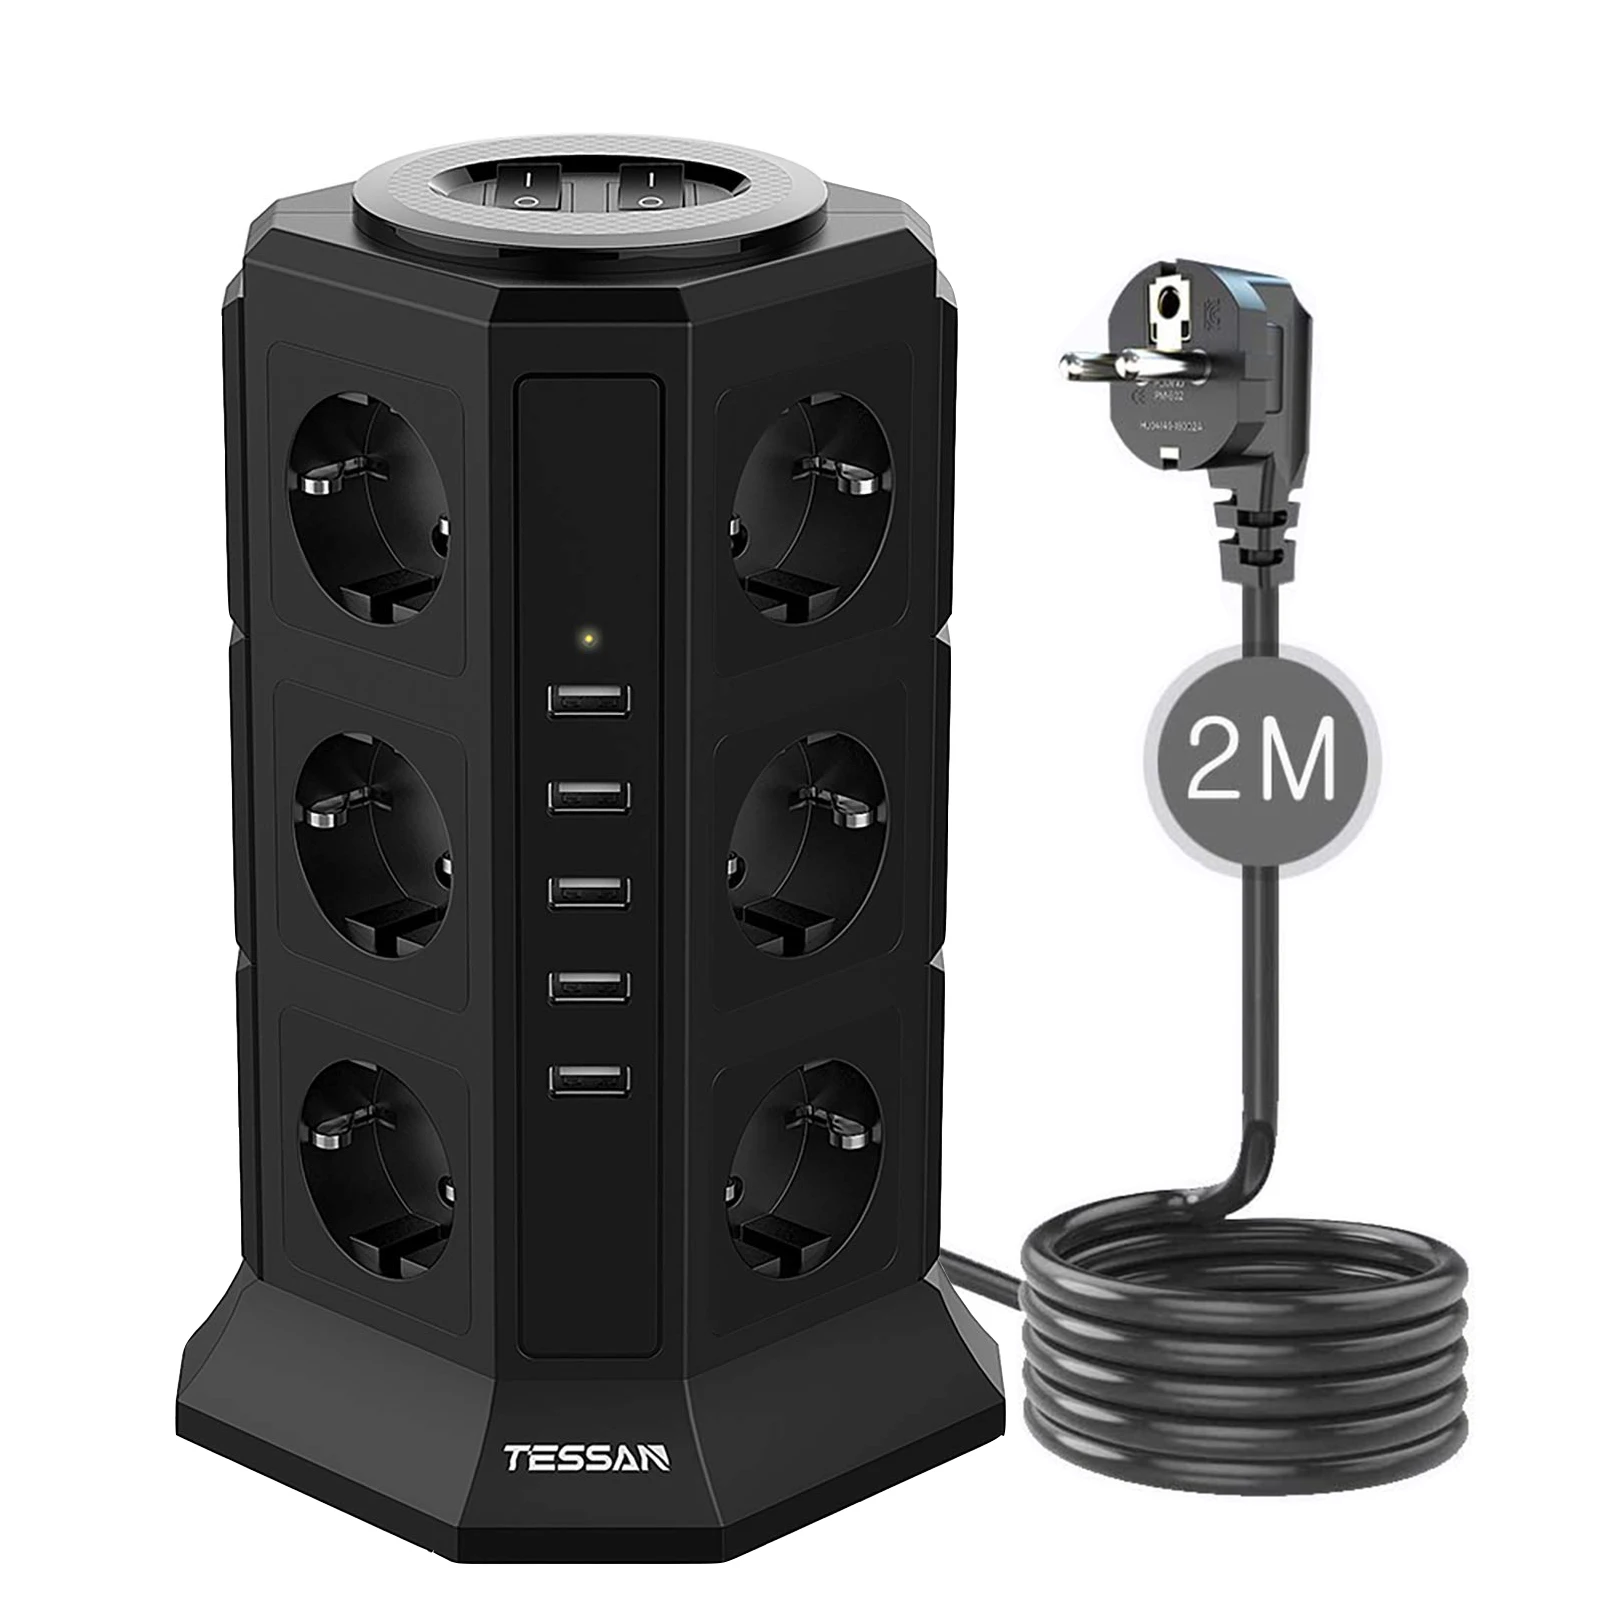 

TESSAN EU Tower Power Strip, with 12 Outlets (2500W/10A), 5 USB Charging Ports & 2M Extension Cord, ON/OFF Switch, for Home